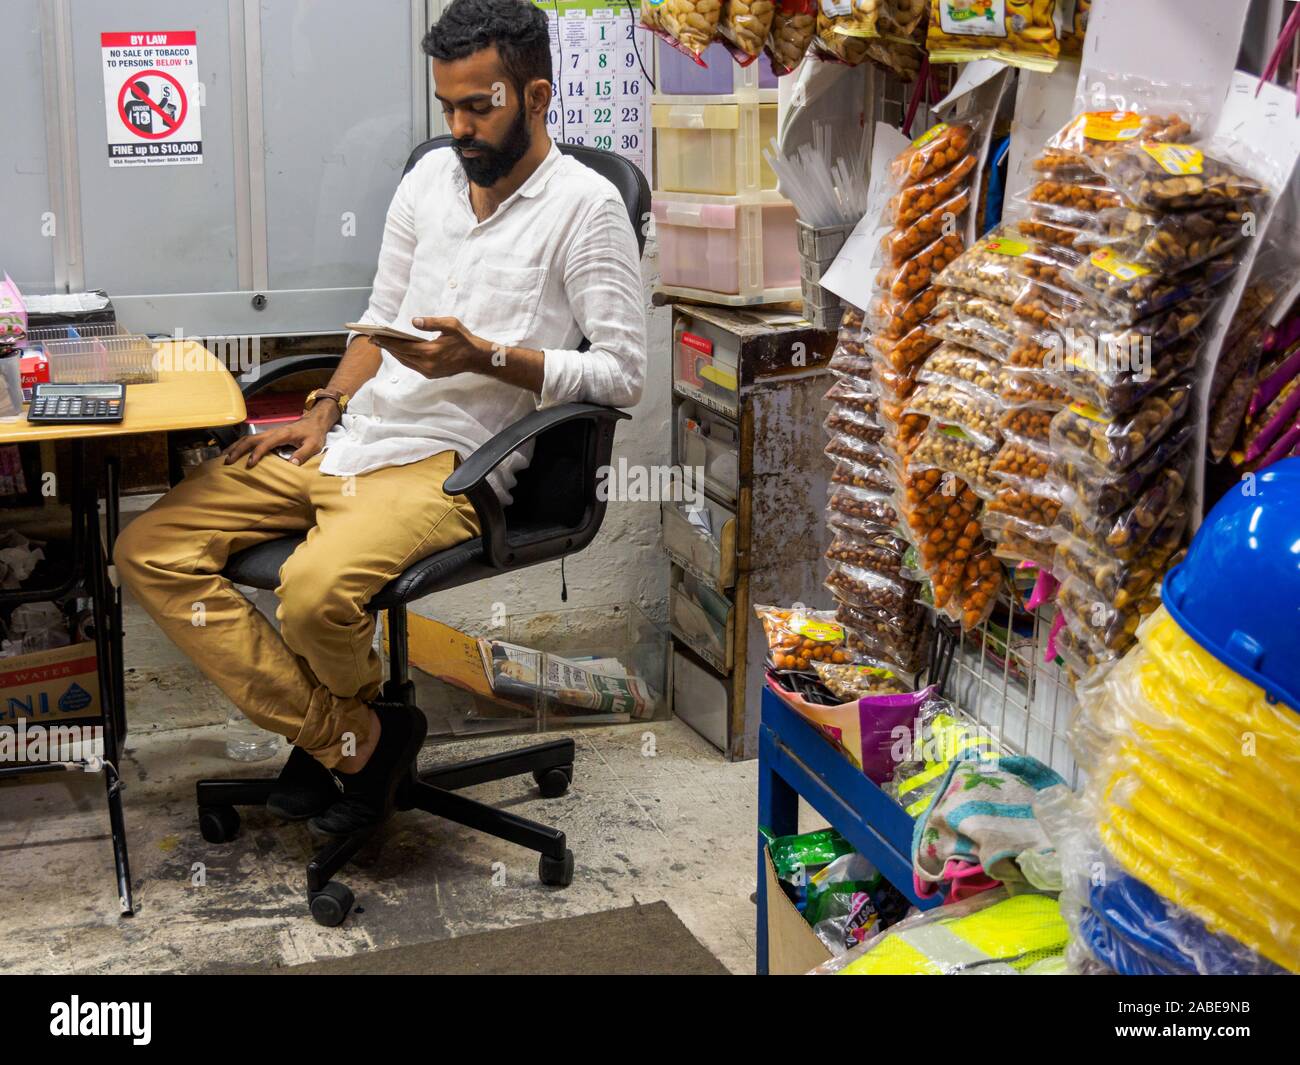 SINGAPORE - 16 MAR 2019 – A Singaporean Indian shopkeeper checks his phone in a traditional corner store / provision shop in Jalan Besar. Small busine Stock Photo